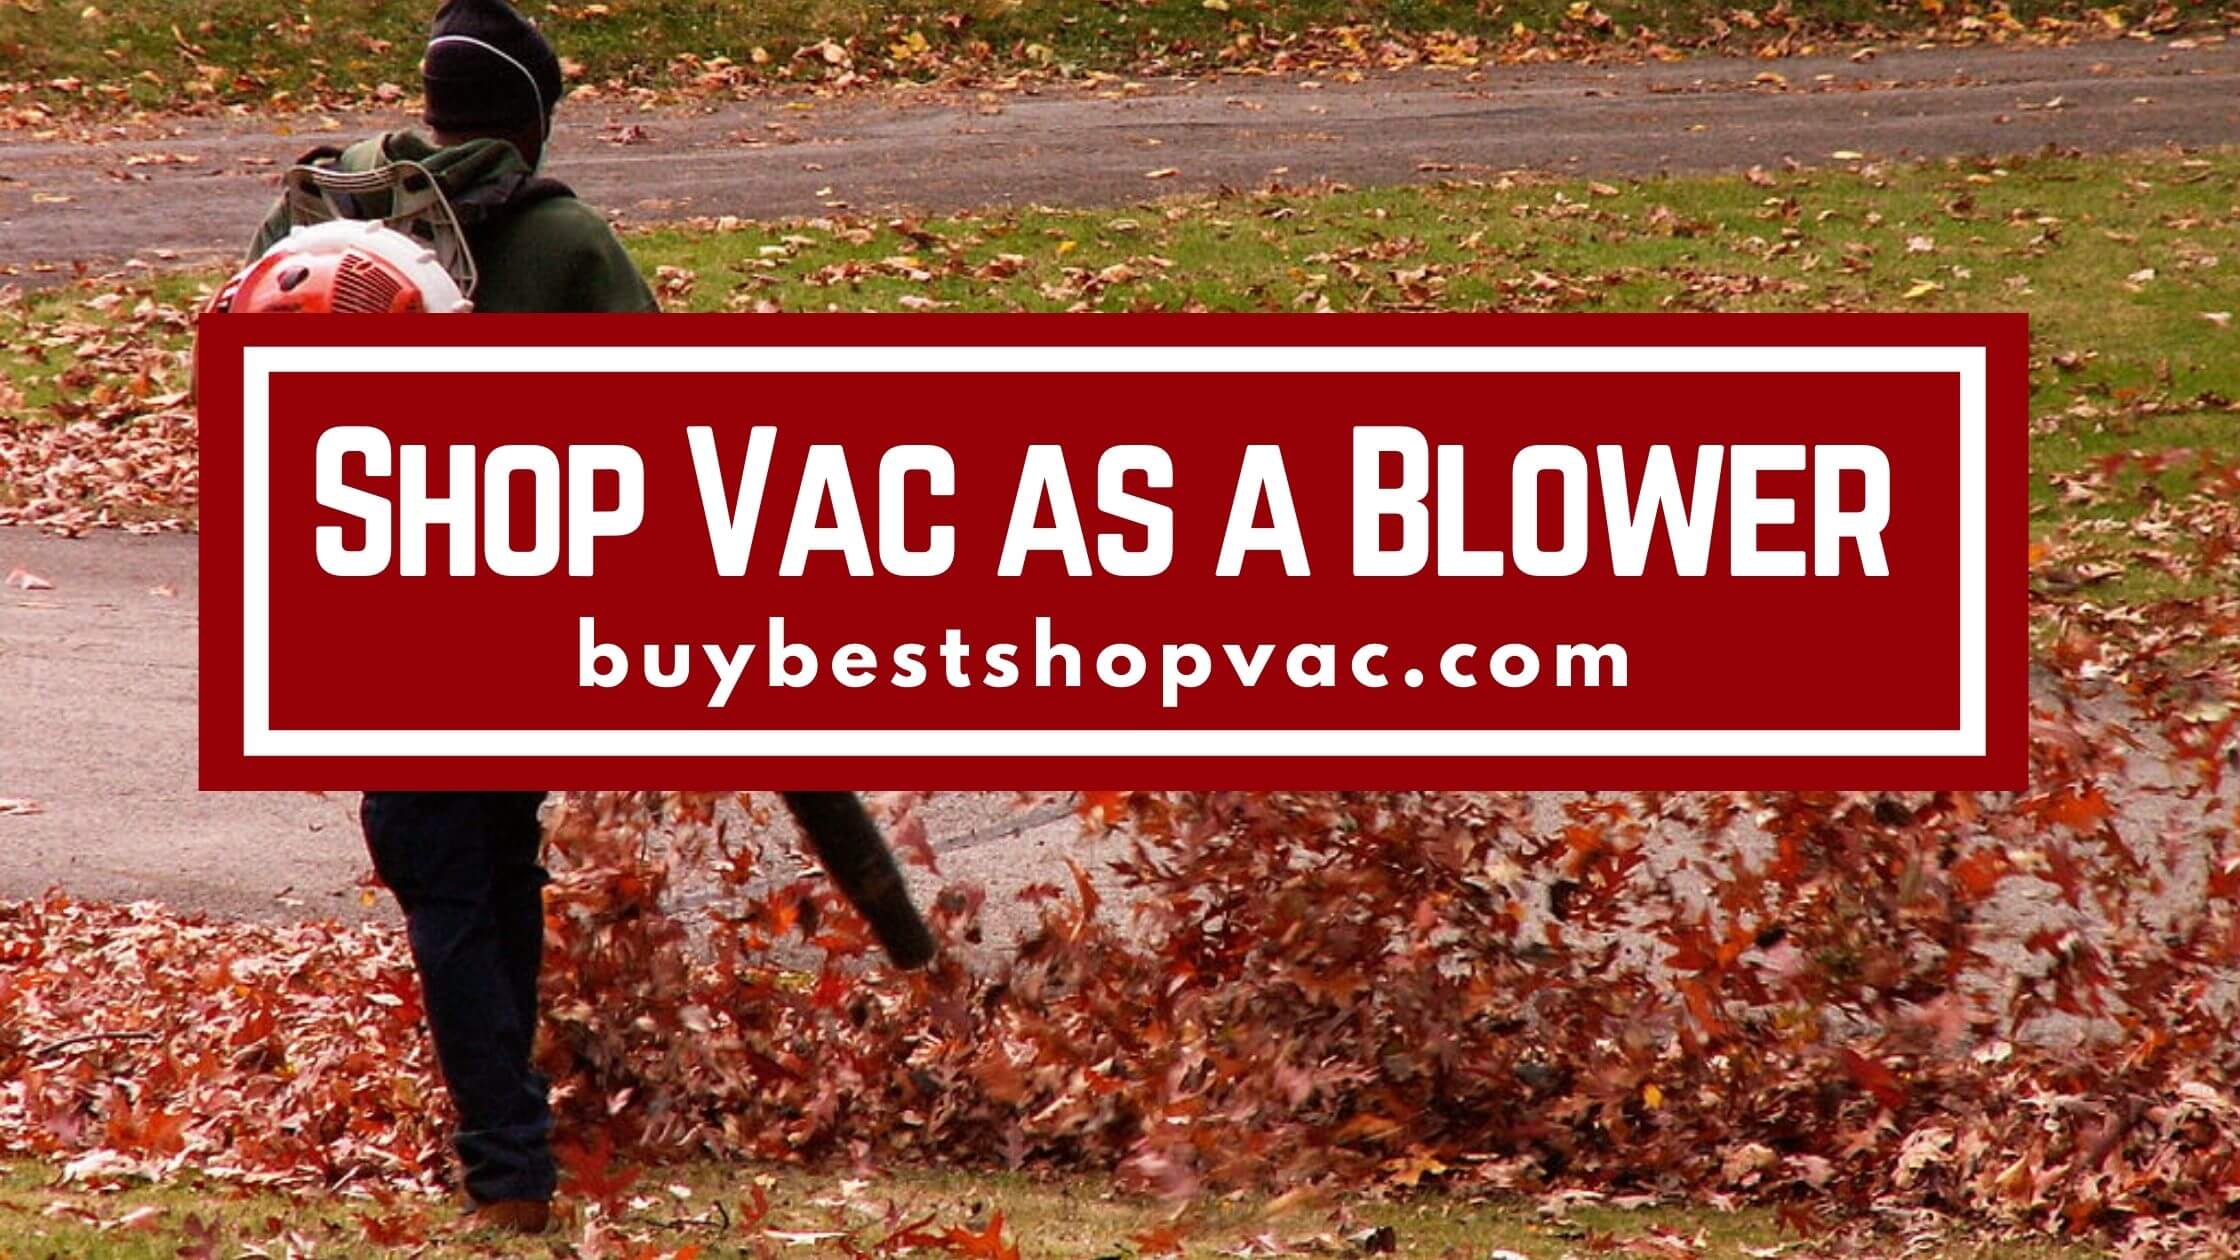 How to Use a Shop Vac as a Blower